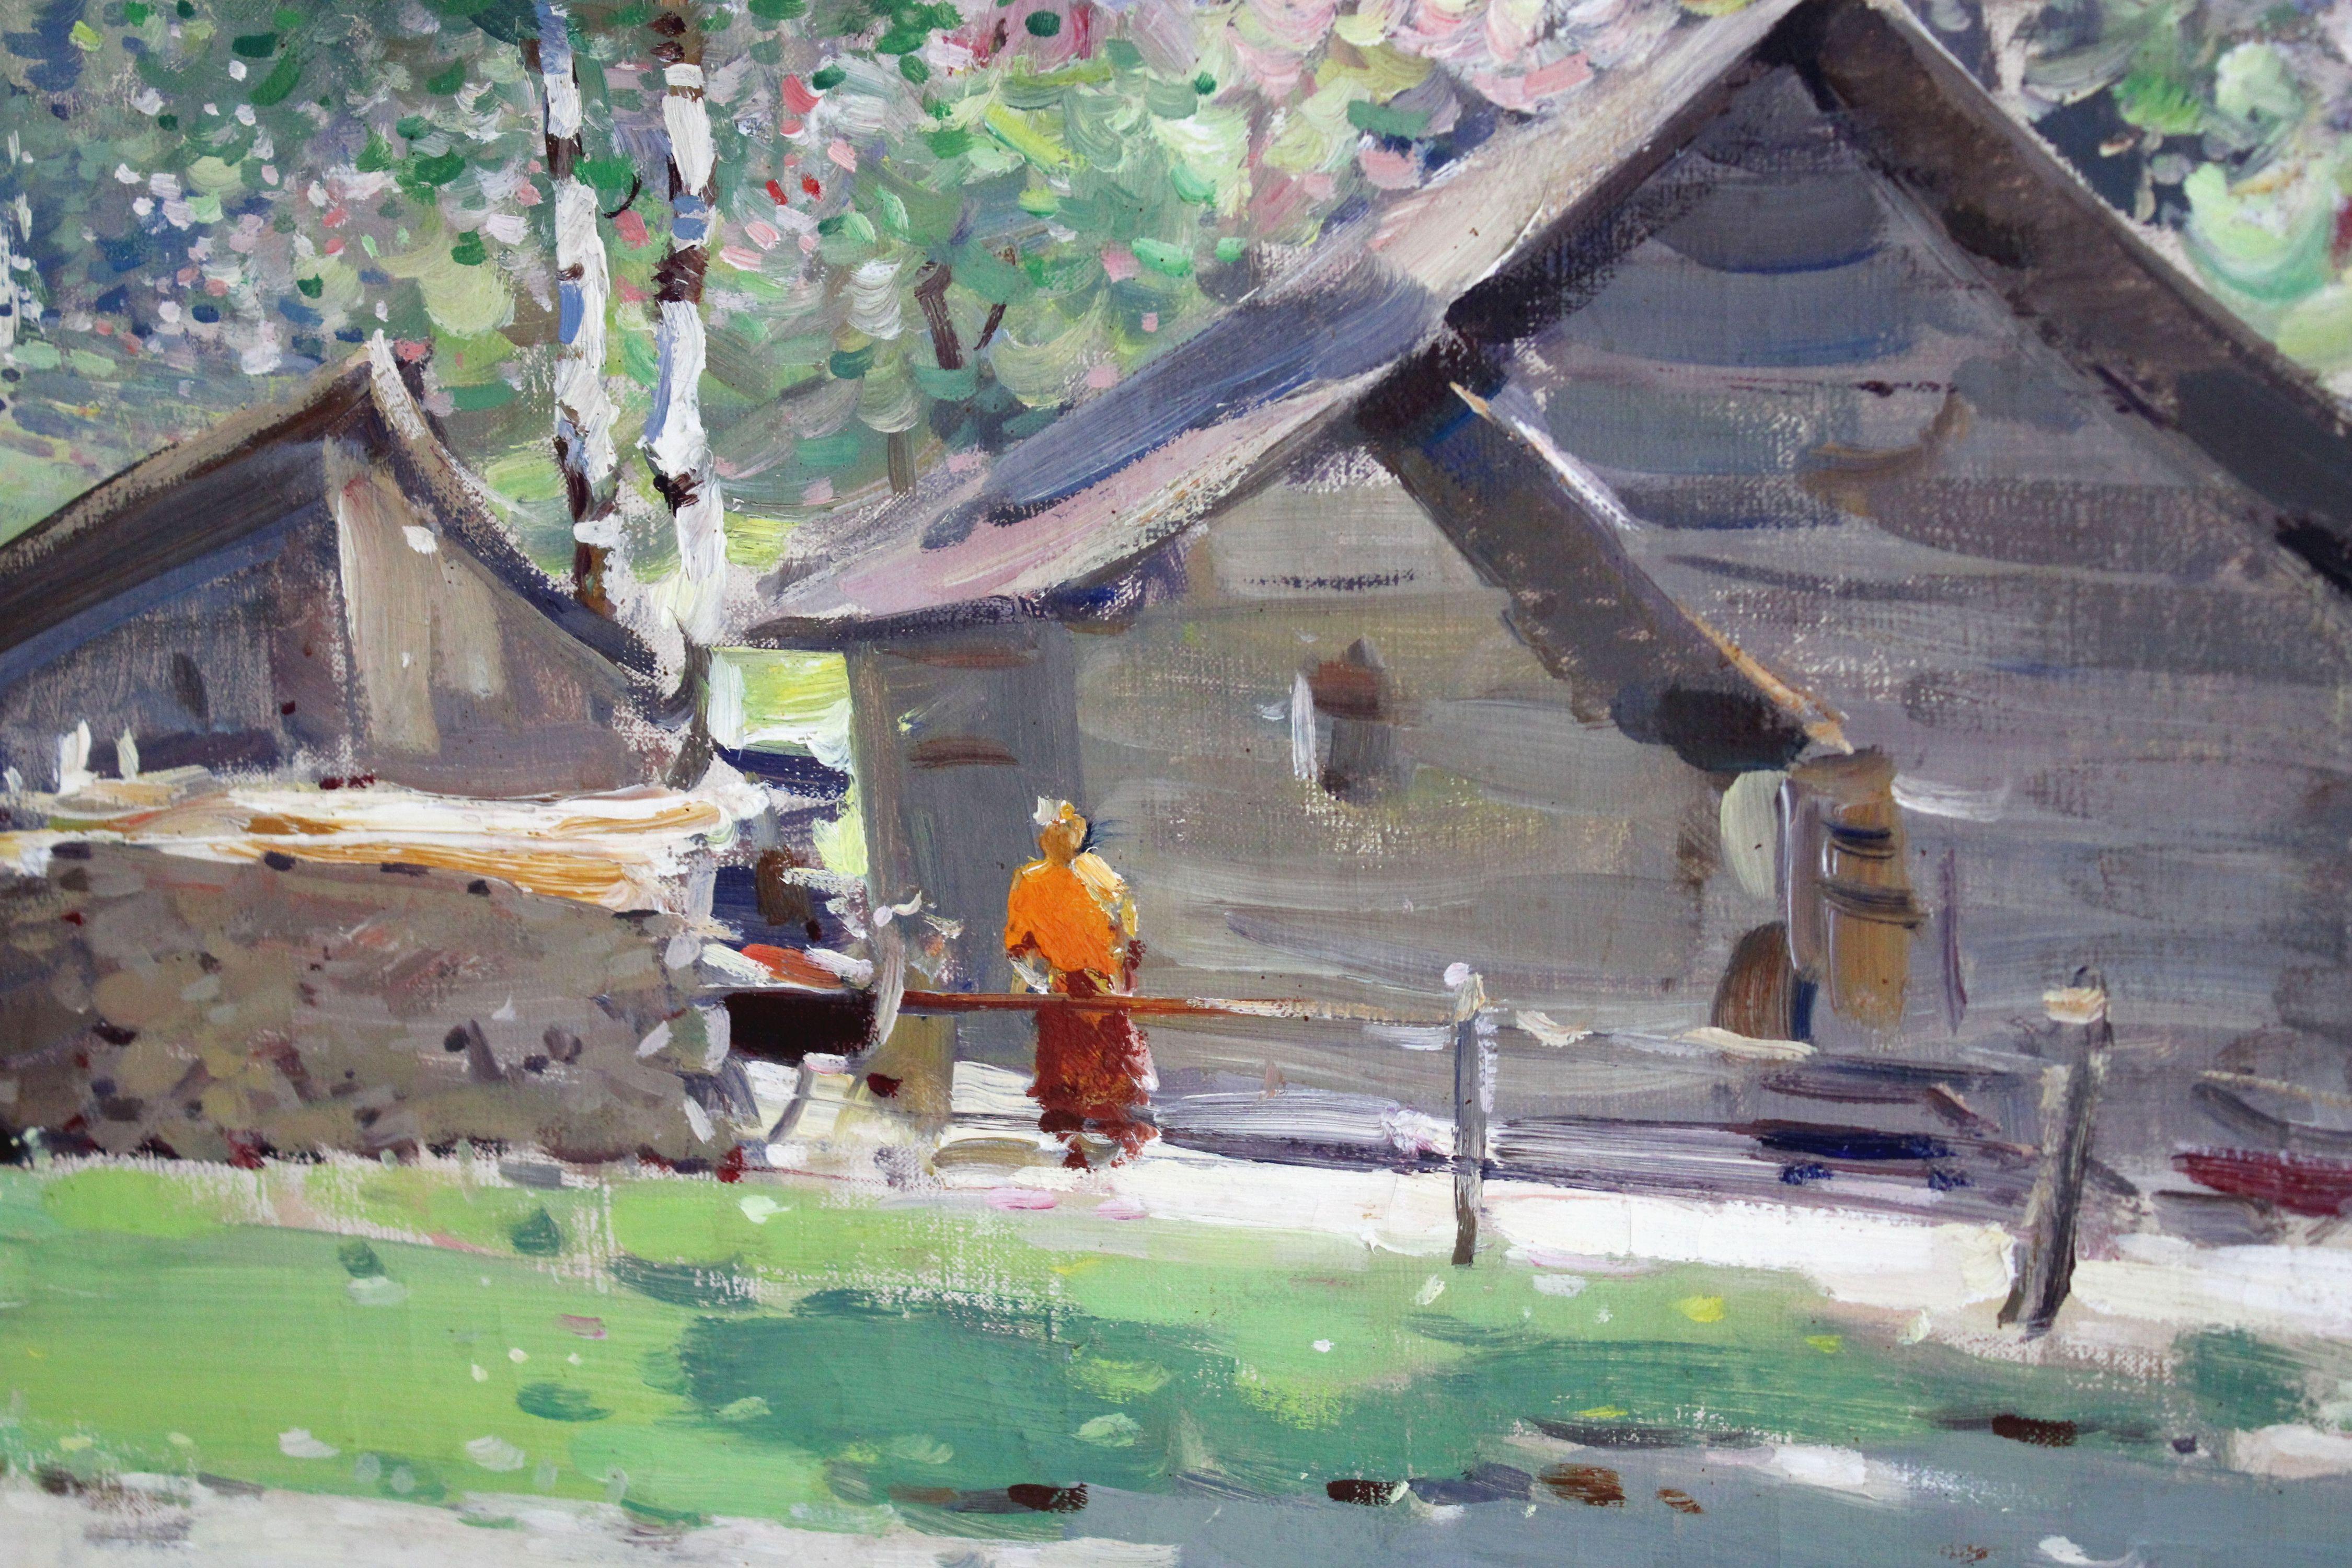 Country yard in spring. Oil on canvas, 74x96 cm

Oto Pladers (1897.8.III – 1970.2.V)
Oto Pladers learned in Riga city school of art (1913 – 15).
He was called into the army in 1916 and continued studies after the war in Latvia Art academy under the